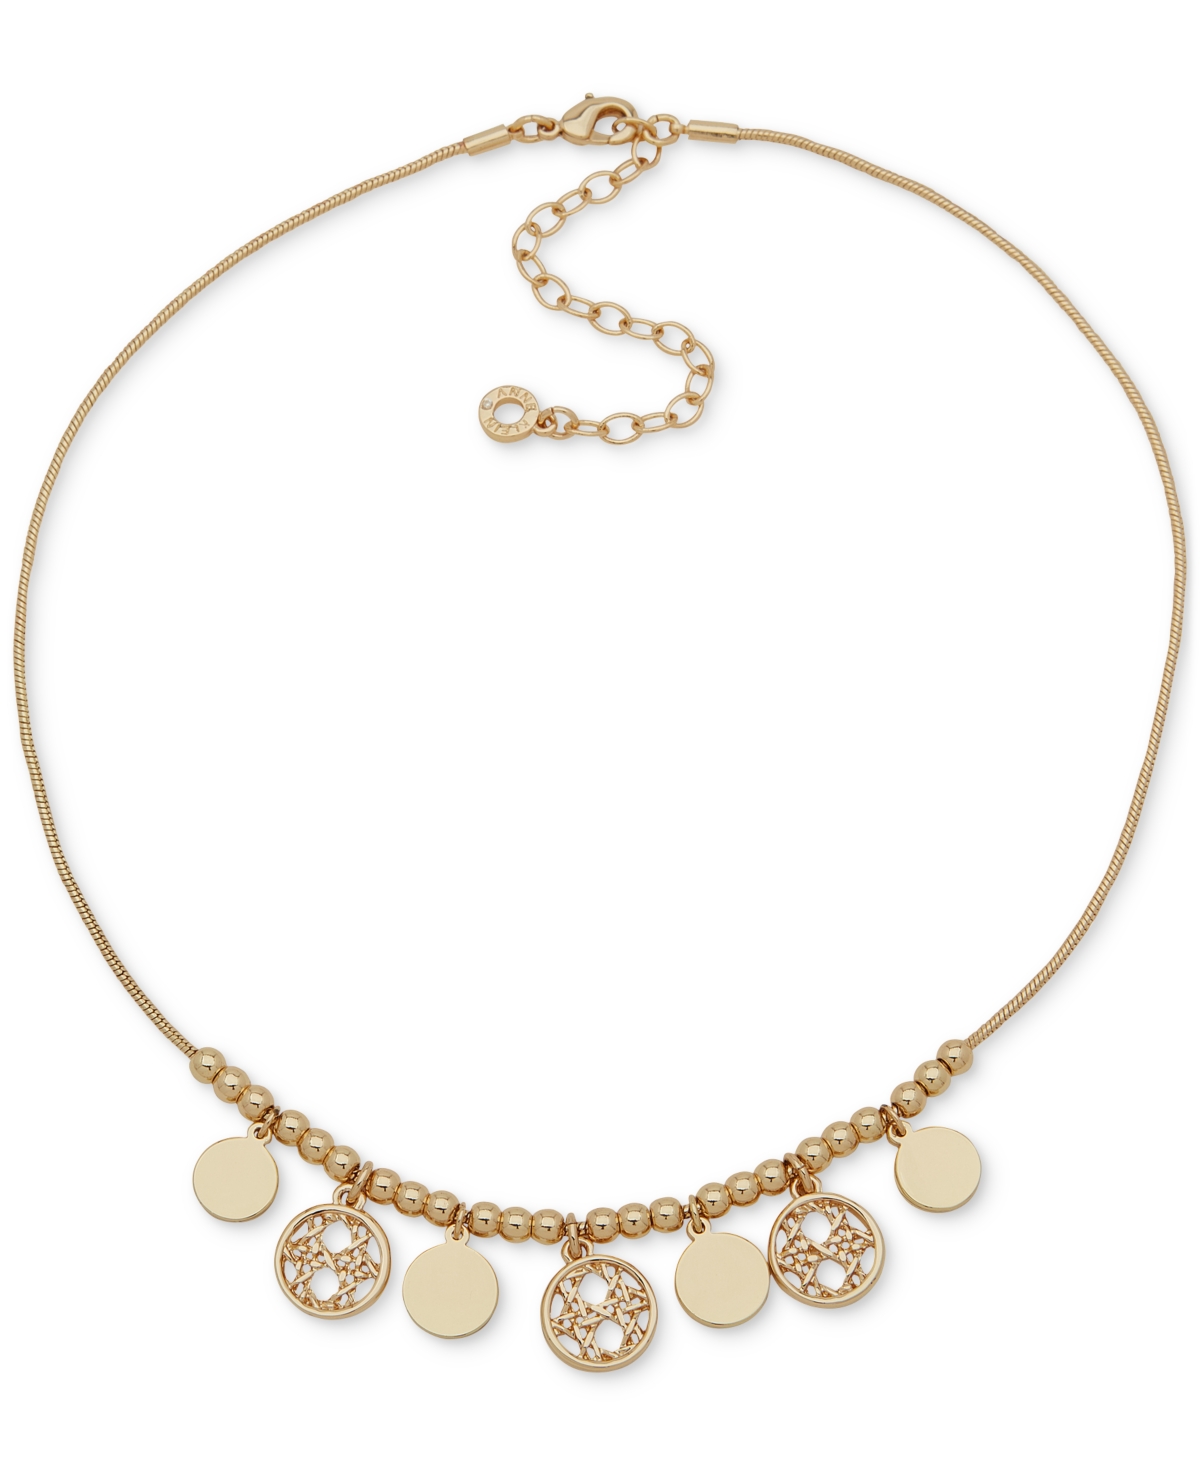 Gold-Tone Lattice Disc Beaded Statement Necklace, 16" + 3" extender - Gold